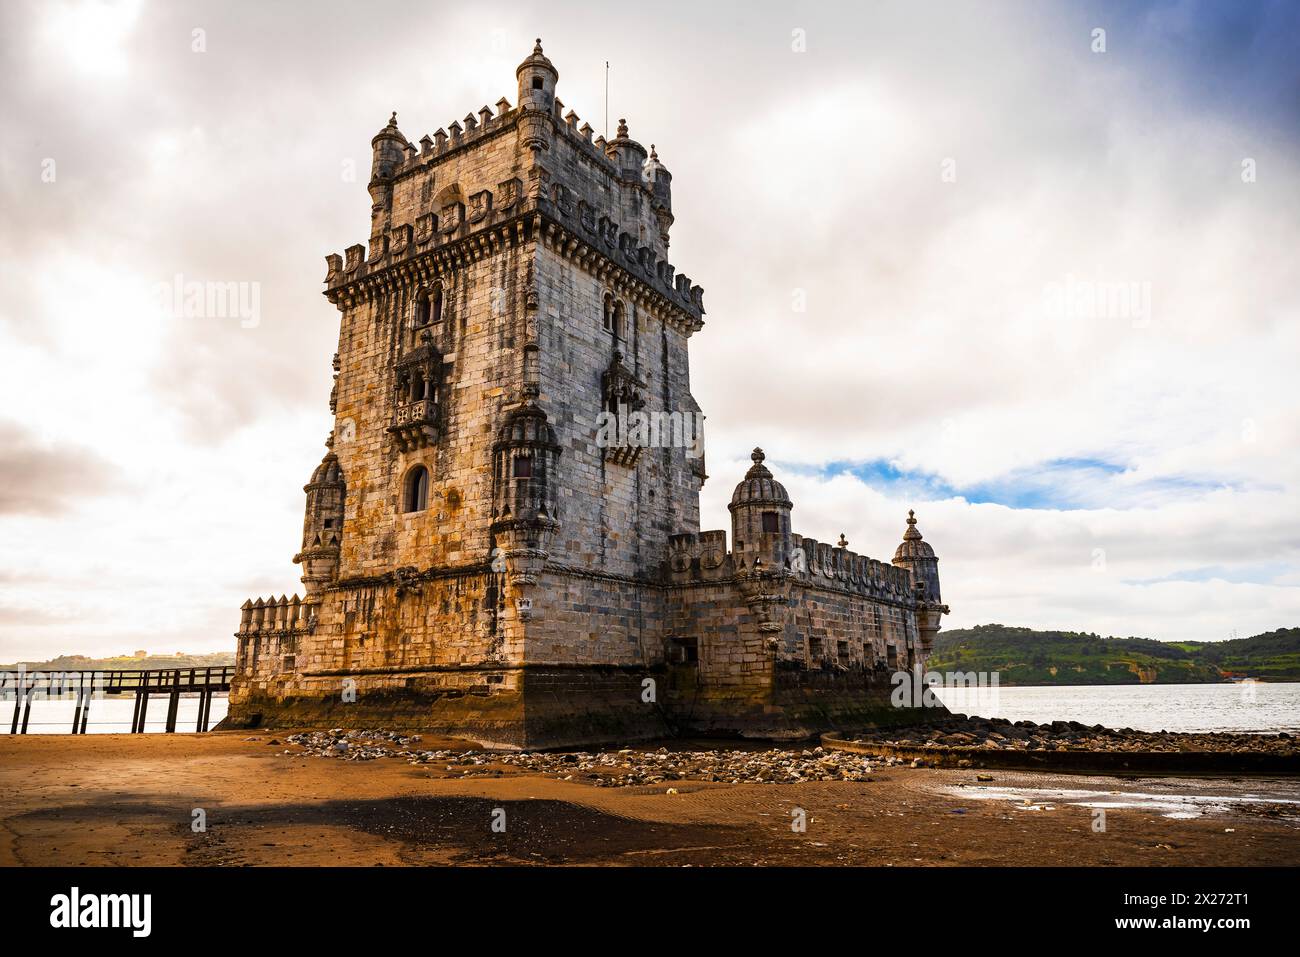 View of the famous tower of  Belem or Torre de Belem, Lisbon, Portugal. The Belém Tower was built between 1514 and 1520 in a Manuelino style by the Po Stock Photo